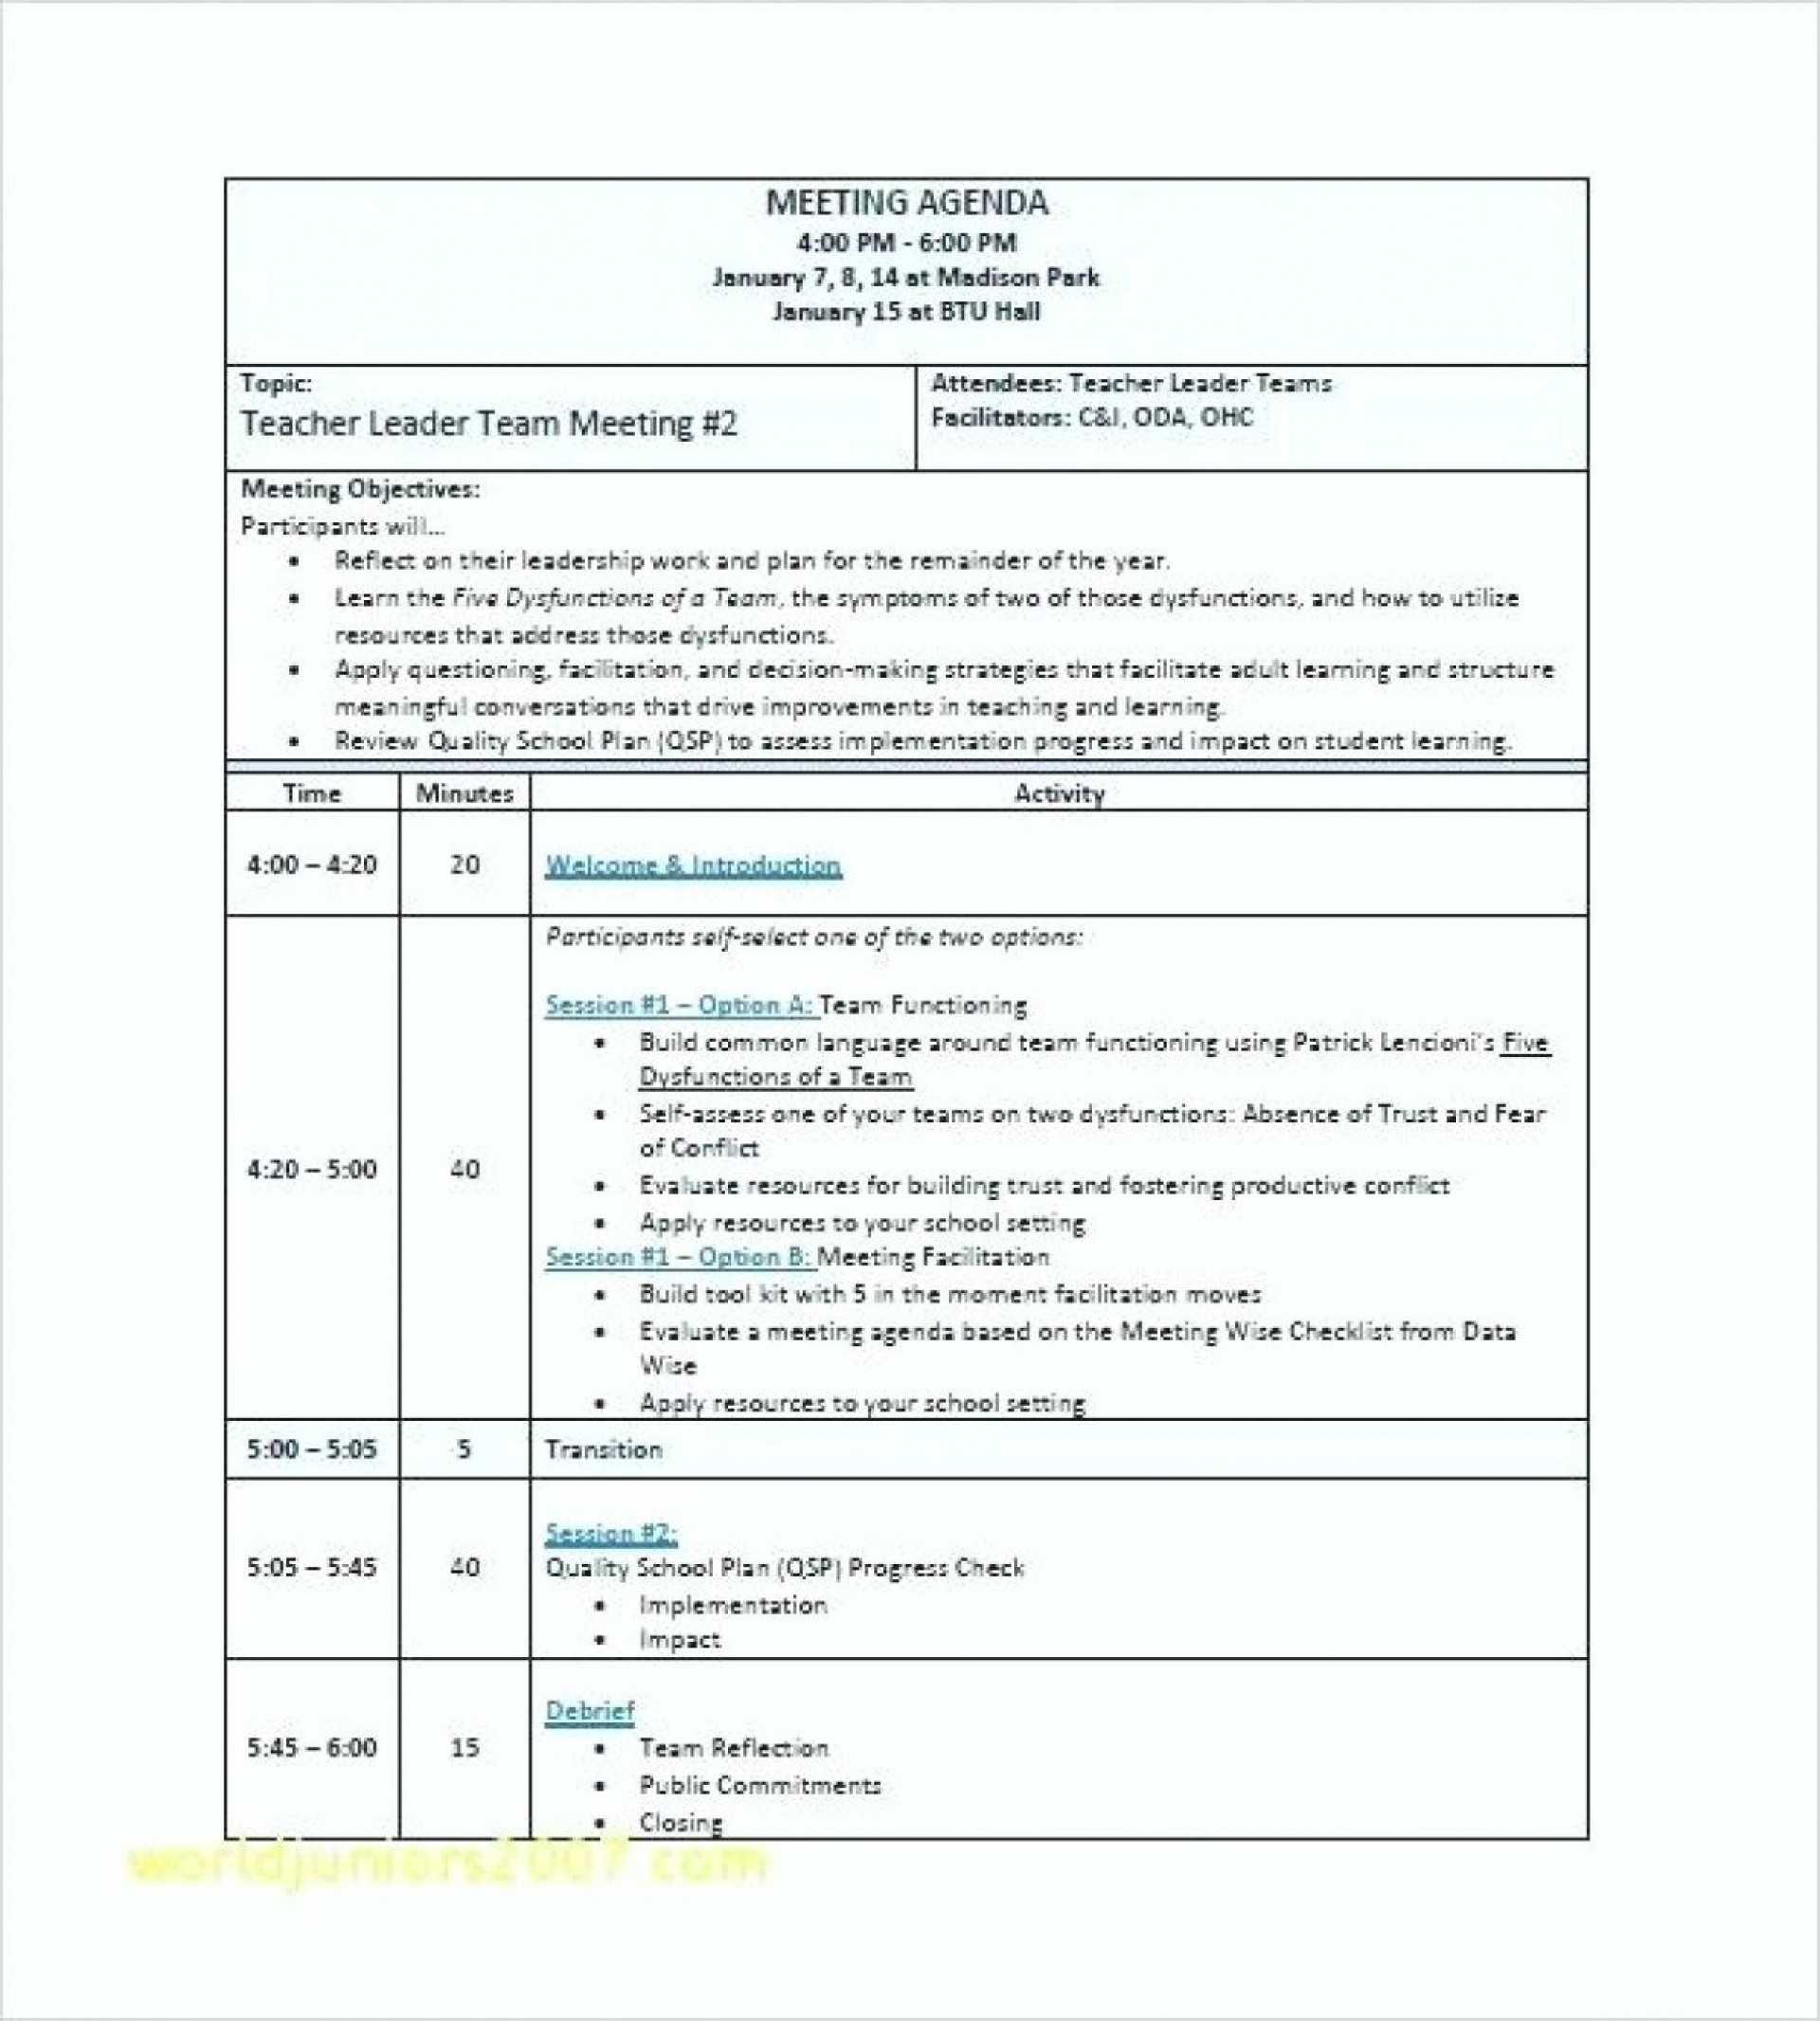 12 13 Word Agenda Vorlage Für Meetings | Ithacar Within Free Meeting Agenda Templates For Word